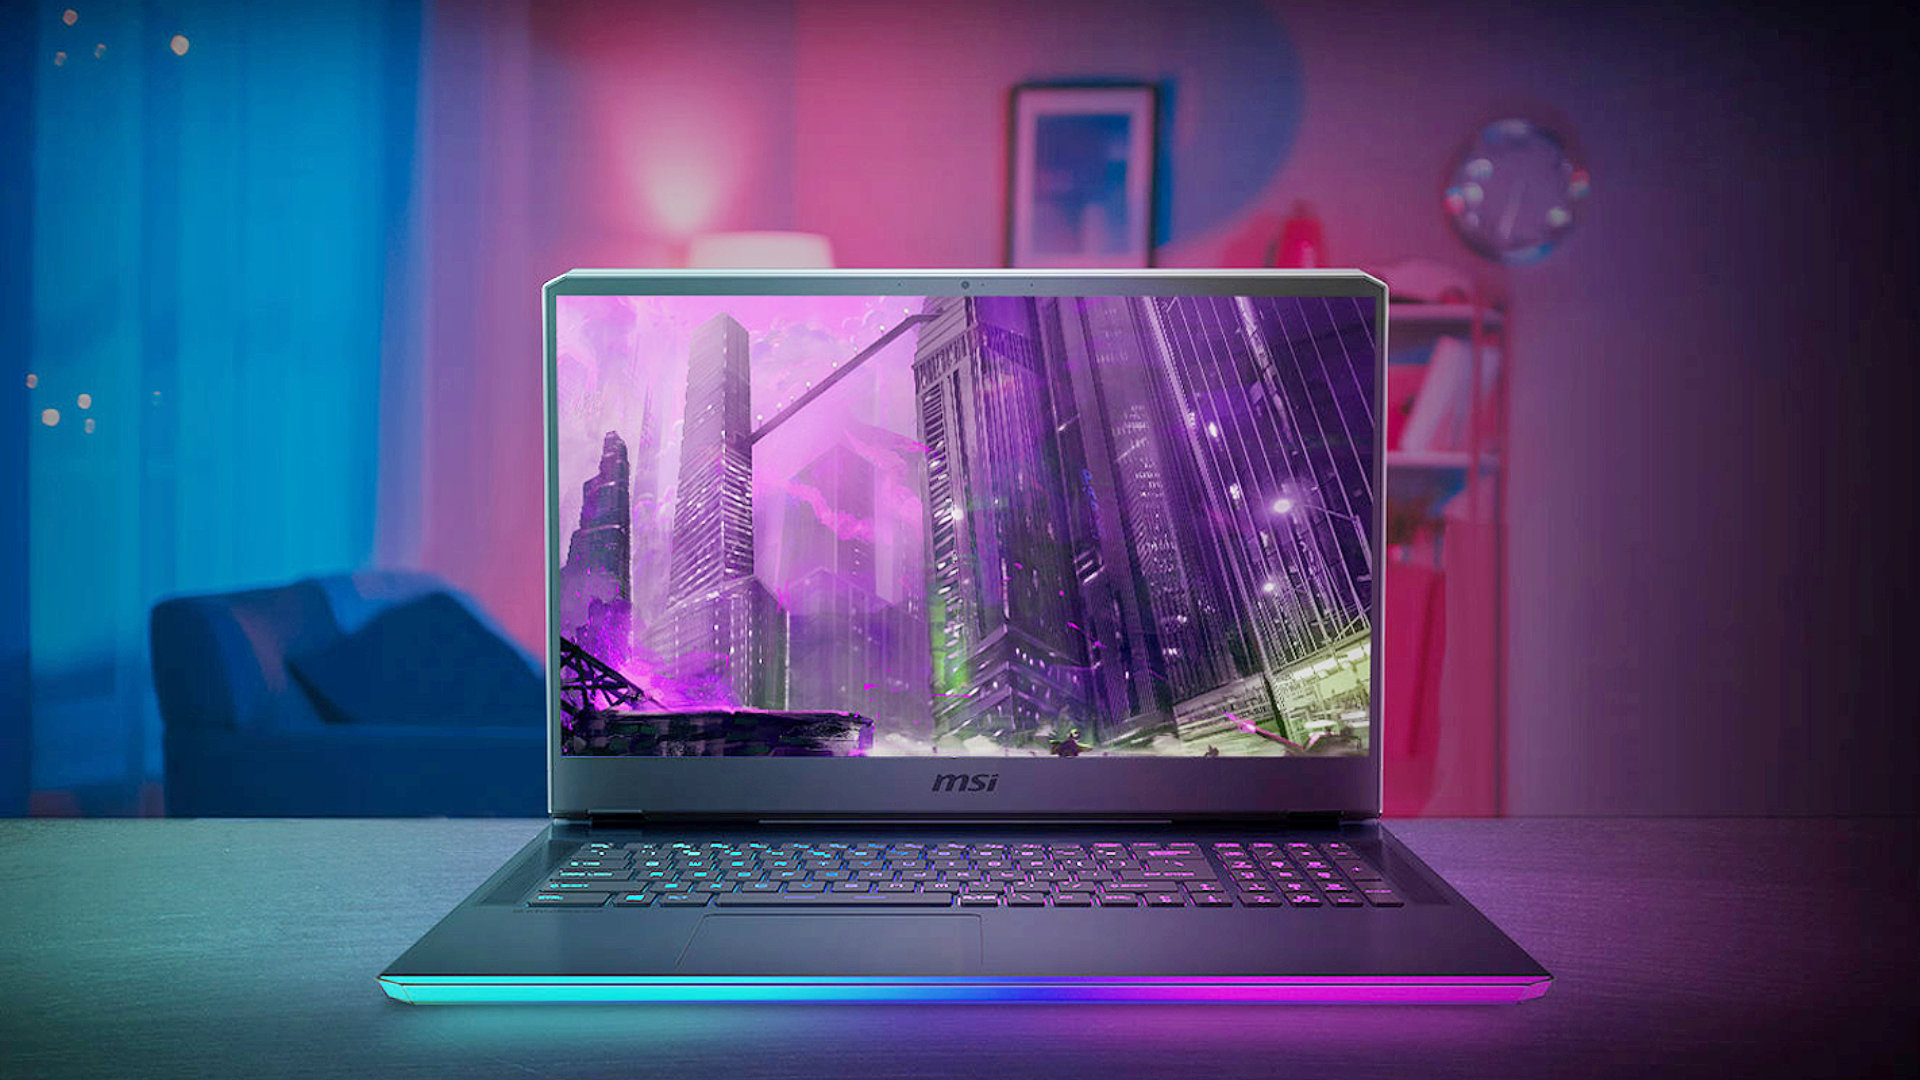 Nvidia RTX 3080 Super GPUs could be inside new gaming laptops next year